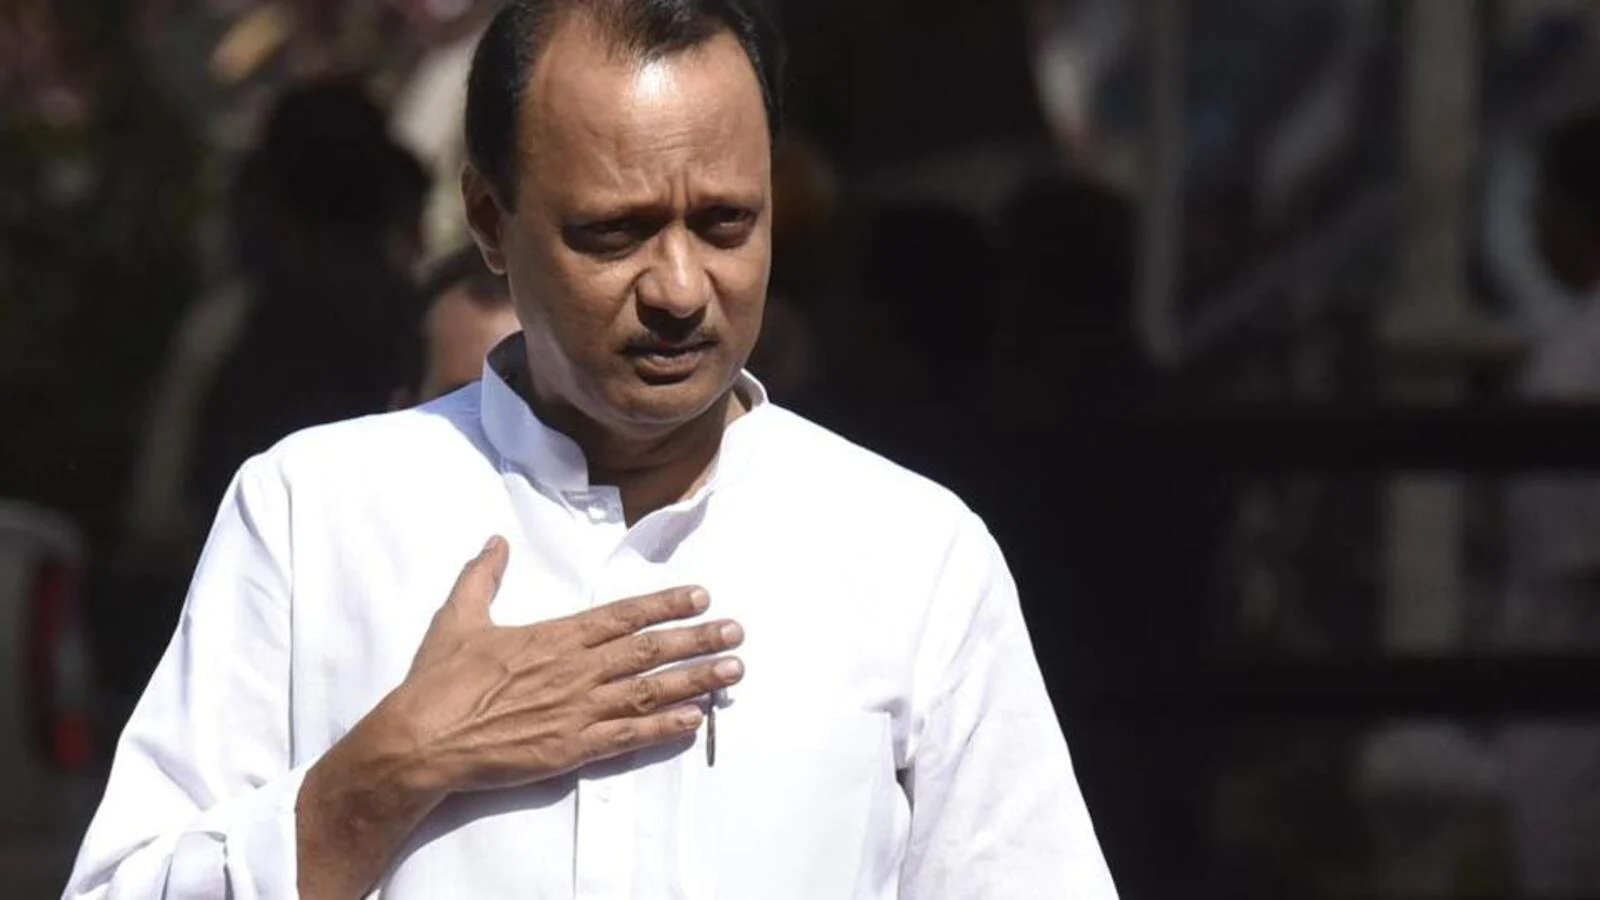 MSCB, under the scanner of authorities for frauds, has garnered profit: Ajit Pawar